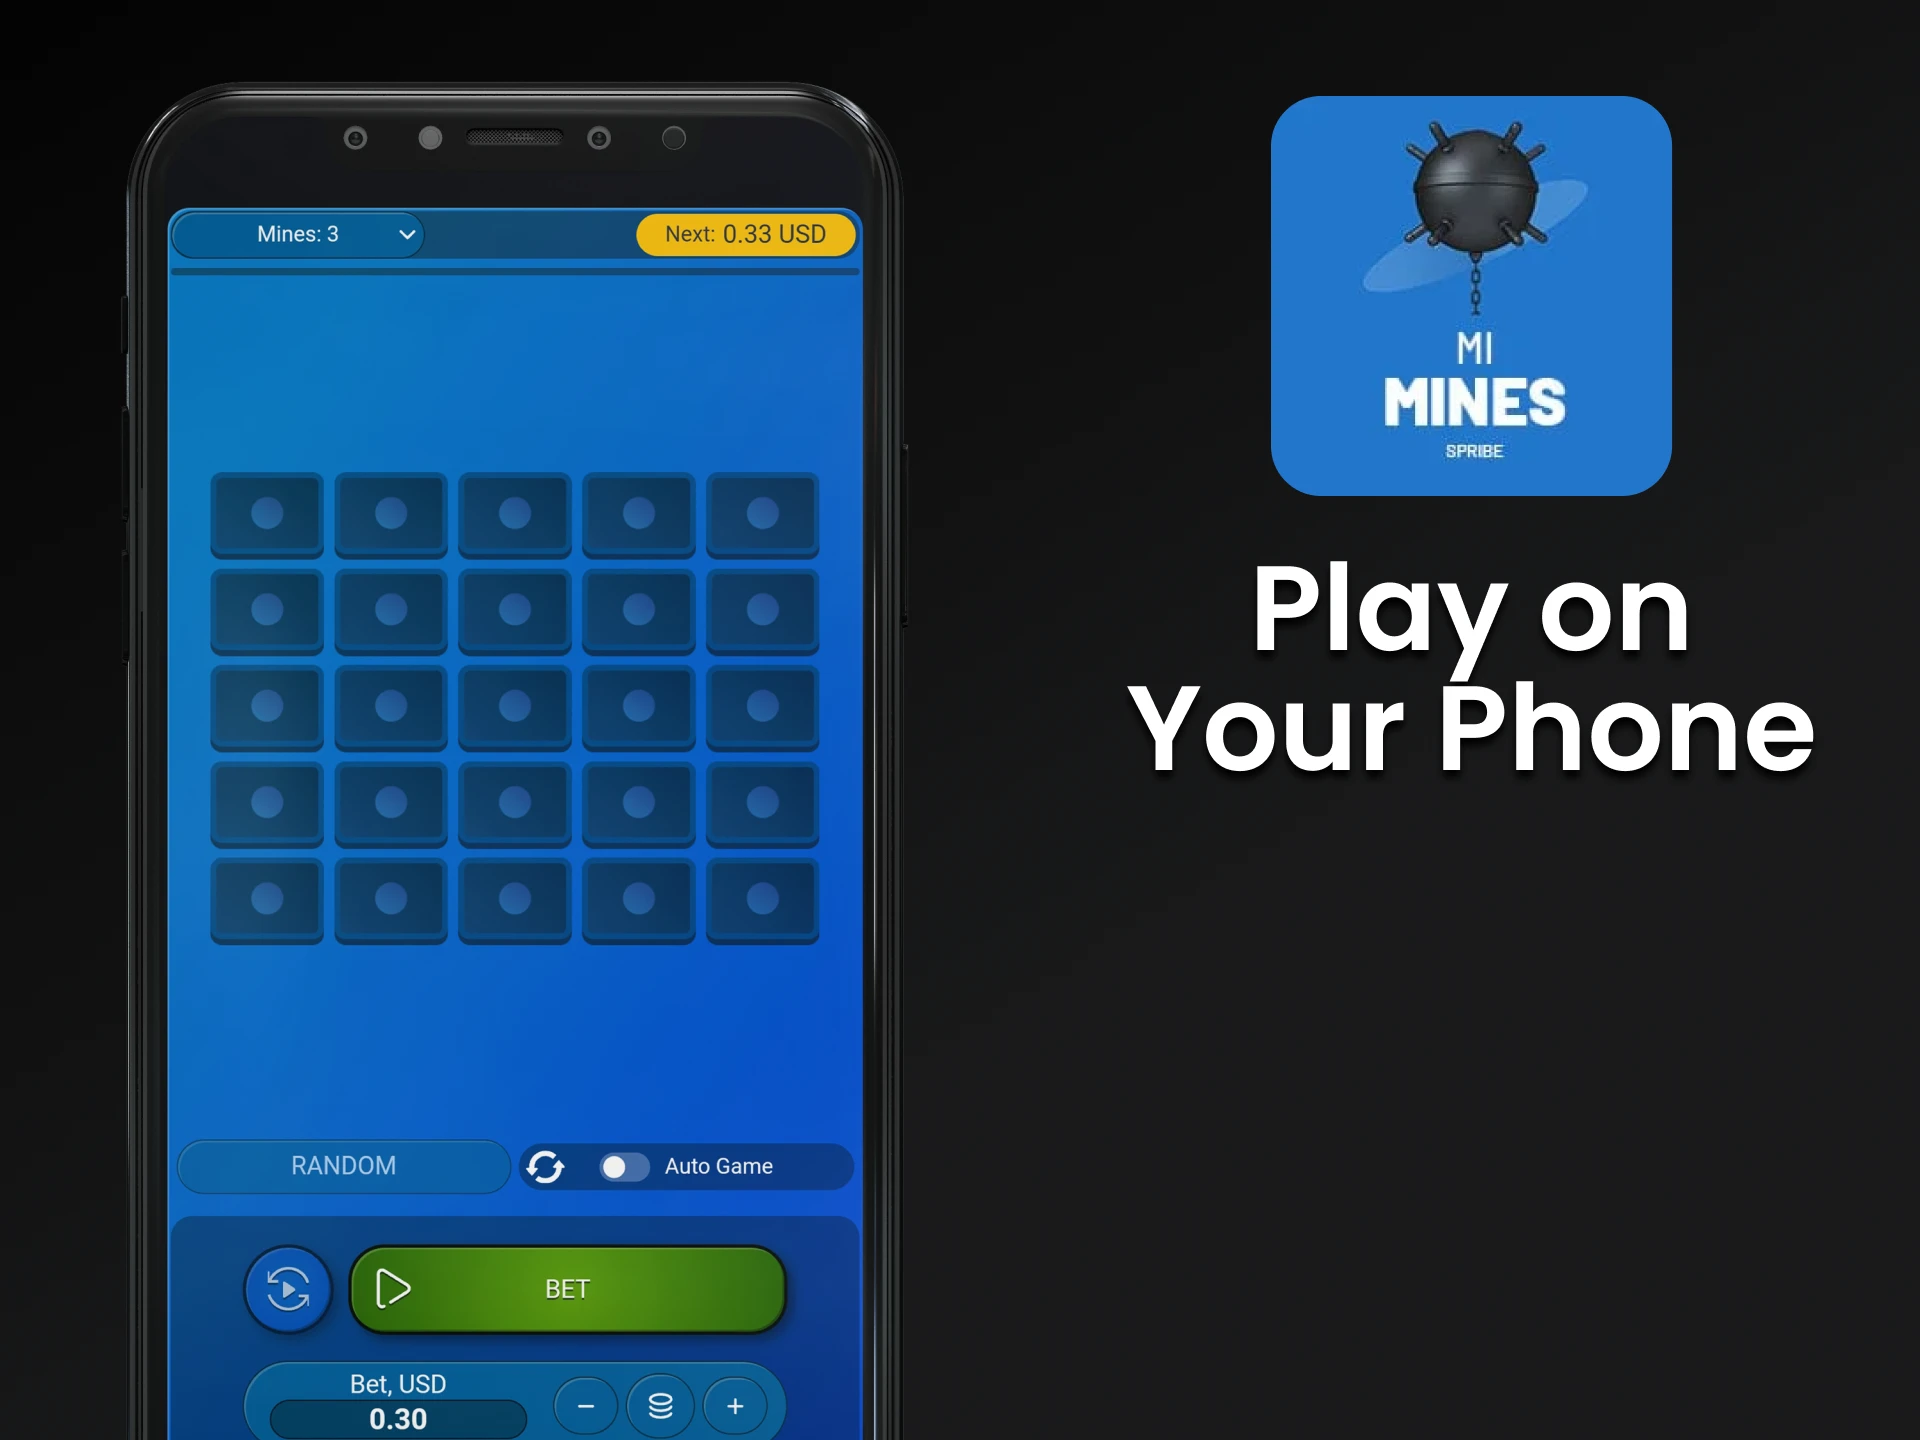 Play Mines through the application on your smartphone.